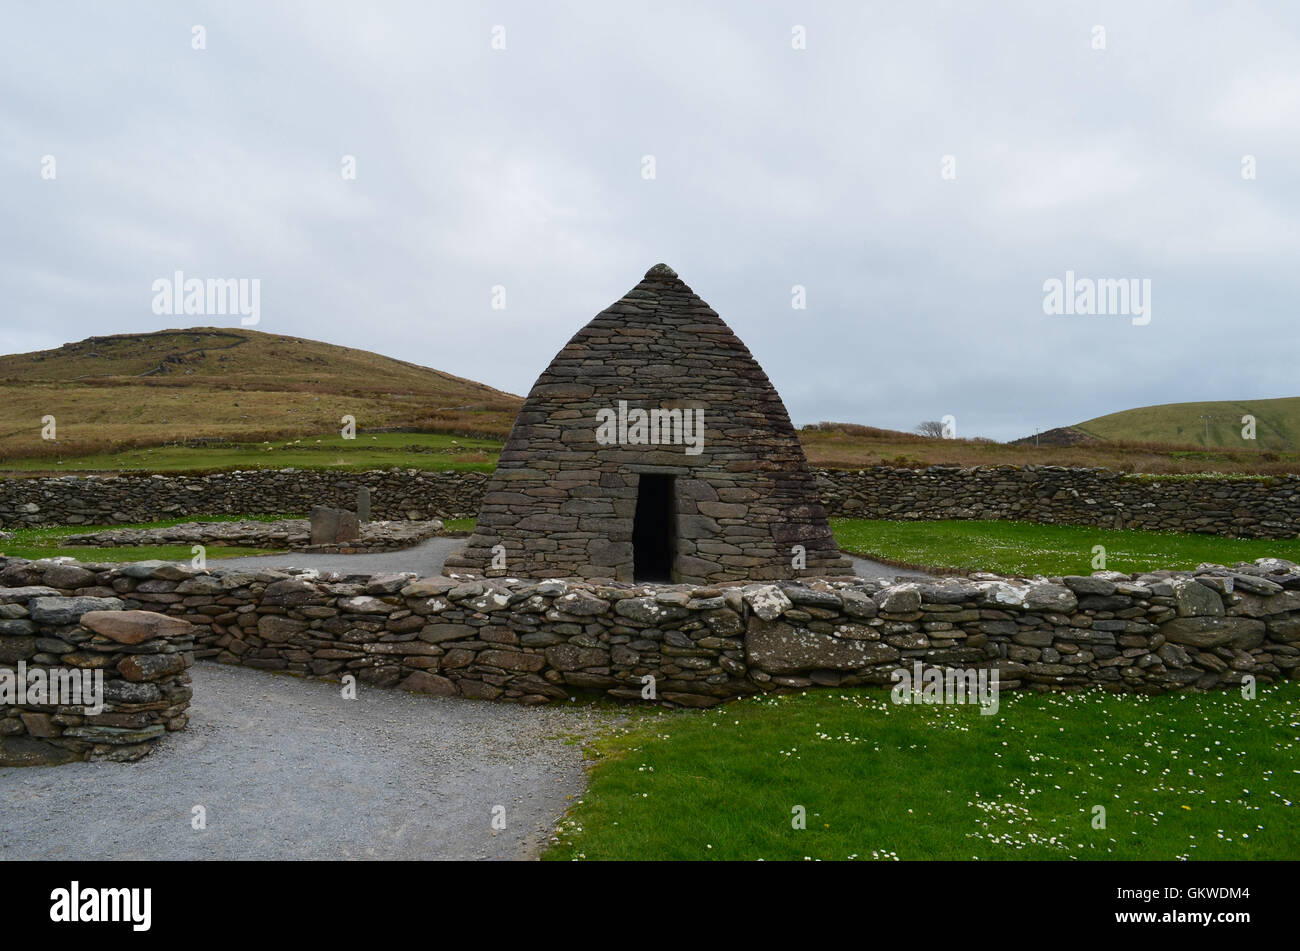 The Gallarus oratory found on the hills of Dingle Penninsula in Ireland. Stock Photo